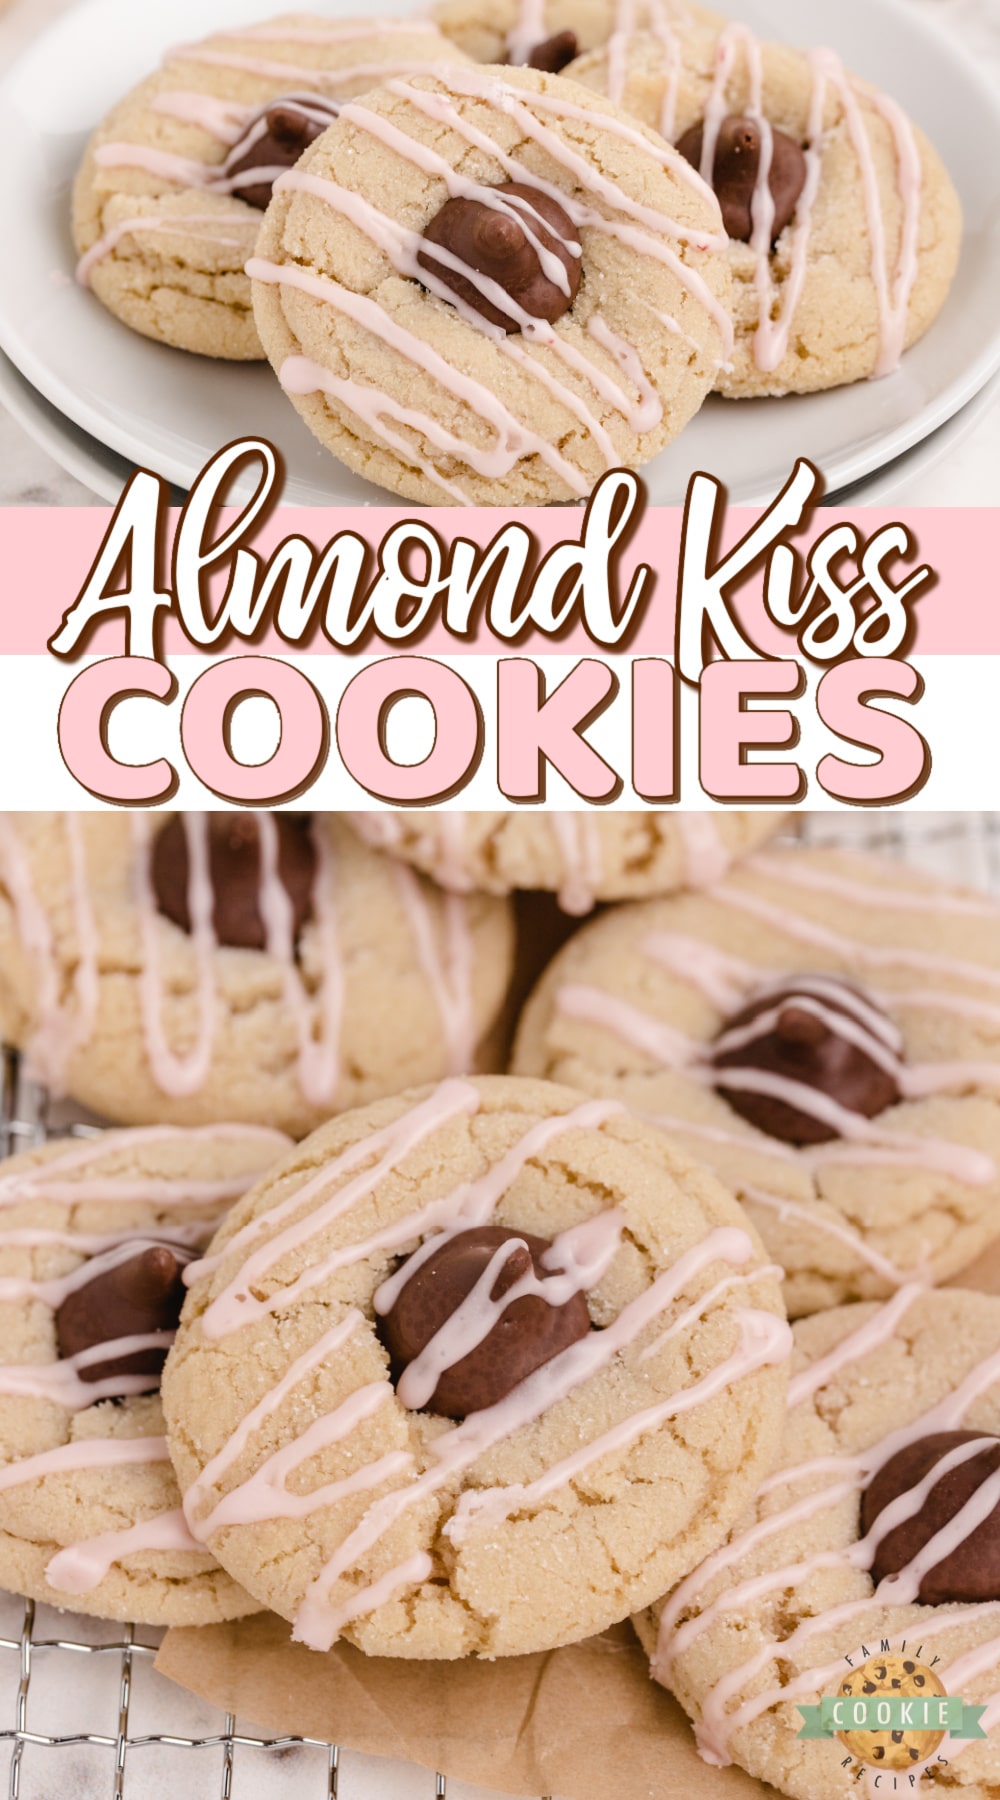 Almond Kiss Cookies made with almond extract and Hershey kisses with almonds! Drizzled with a simple raspberry glaze, these make a fantastic alternative to the traditional peanut butter blossoms! via @buttergirls